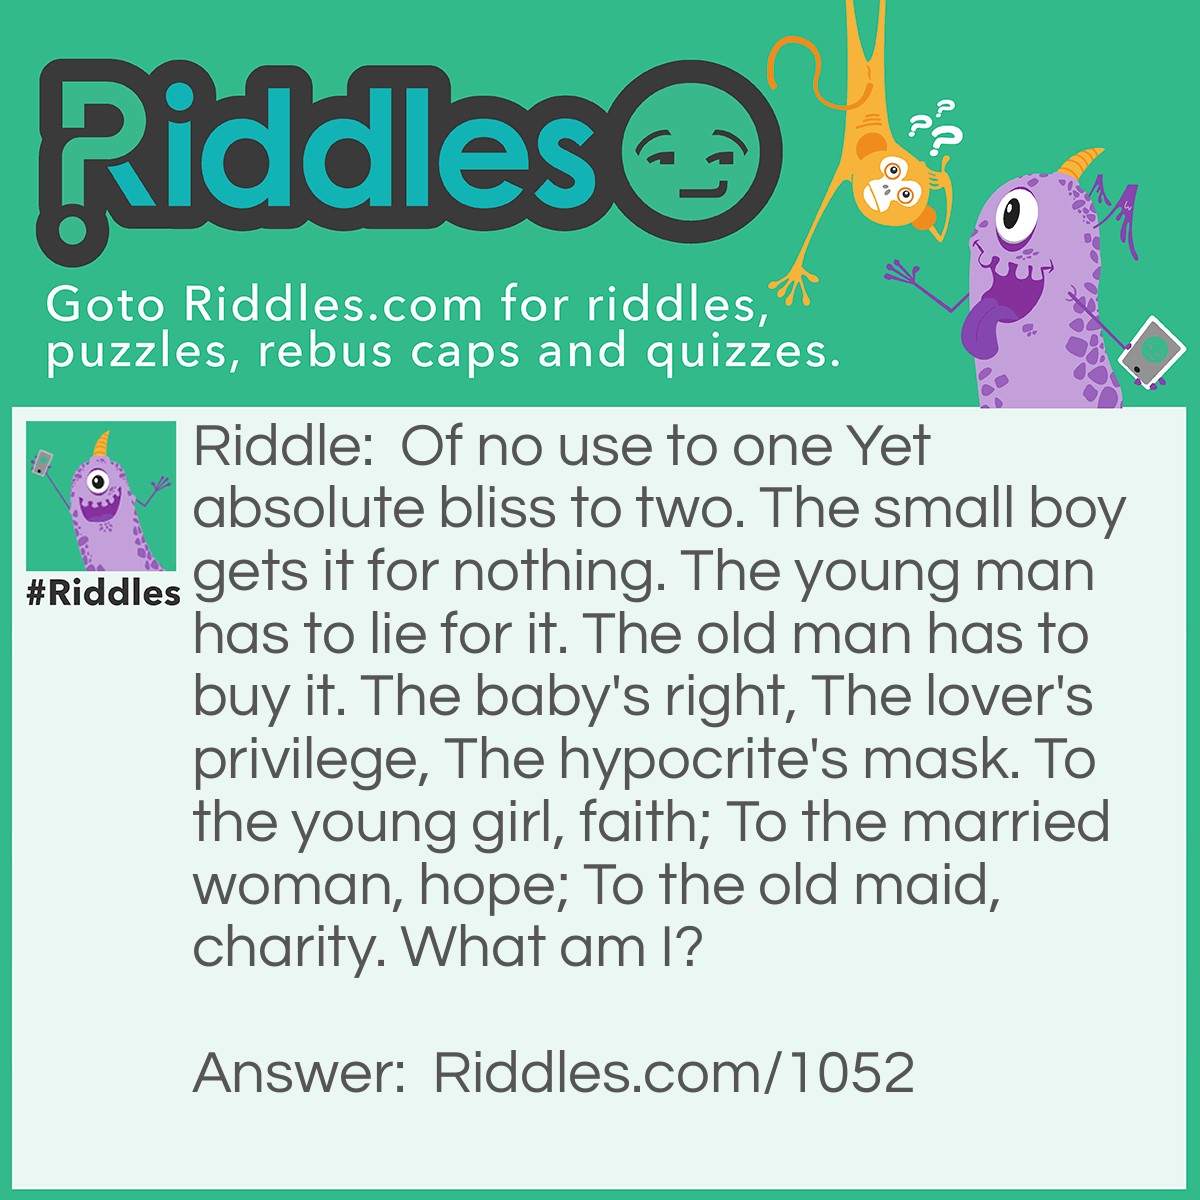 Riddle: Of no use to one Yet absolute bliss to two. The small boy gets it for nothing. The young man has to lie for it. The old man has to buy it. The baby's right, The lover's privilege, The hypocrite's mask. To the young girl, faith; To the married woman, hope; To the old maid, charity. What am I? Answer: A Kiss.